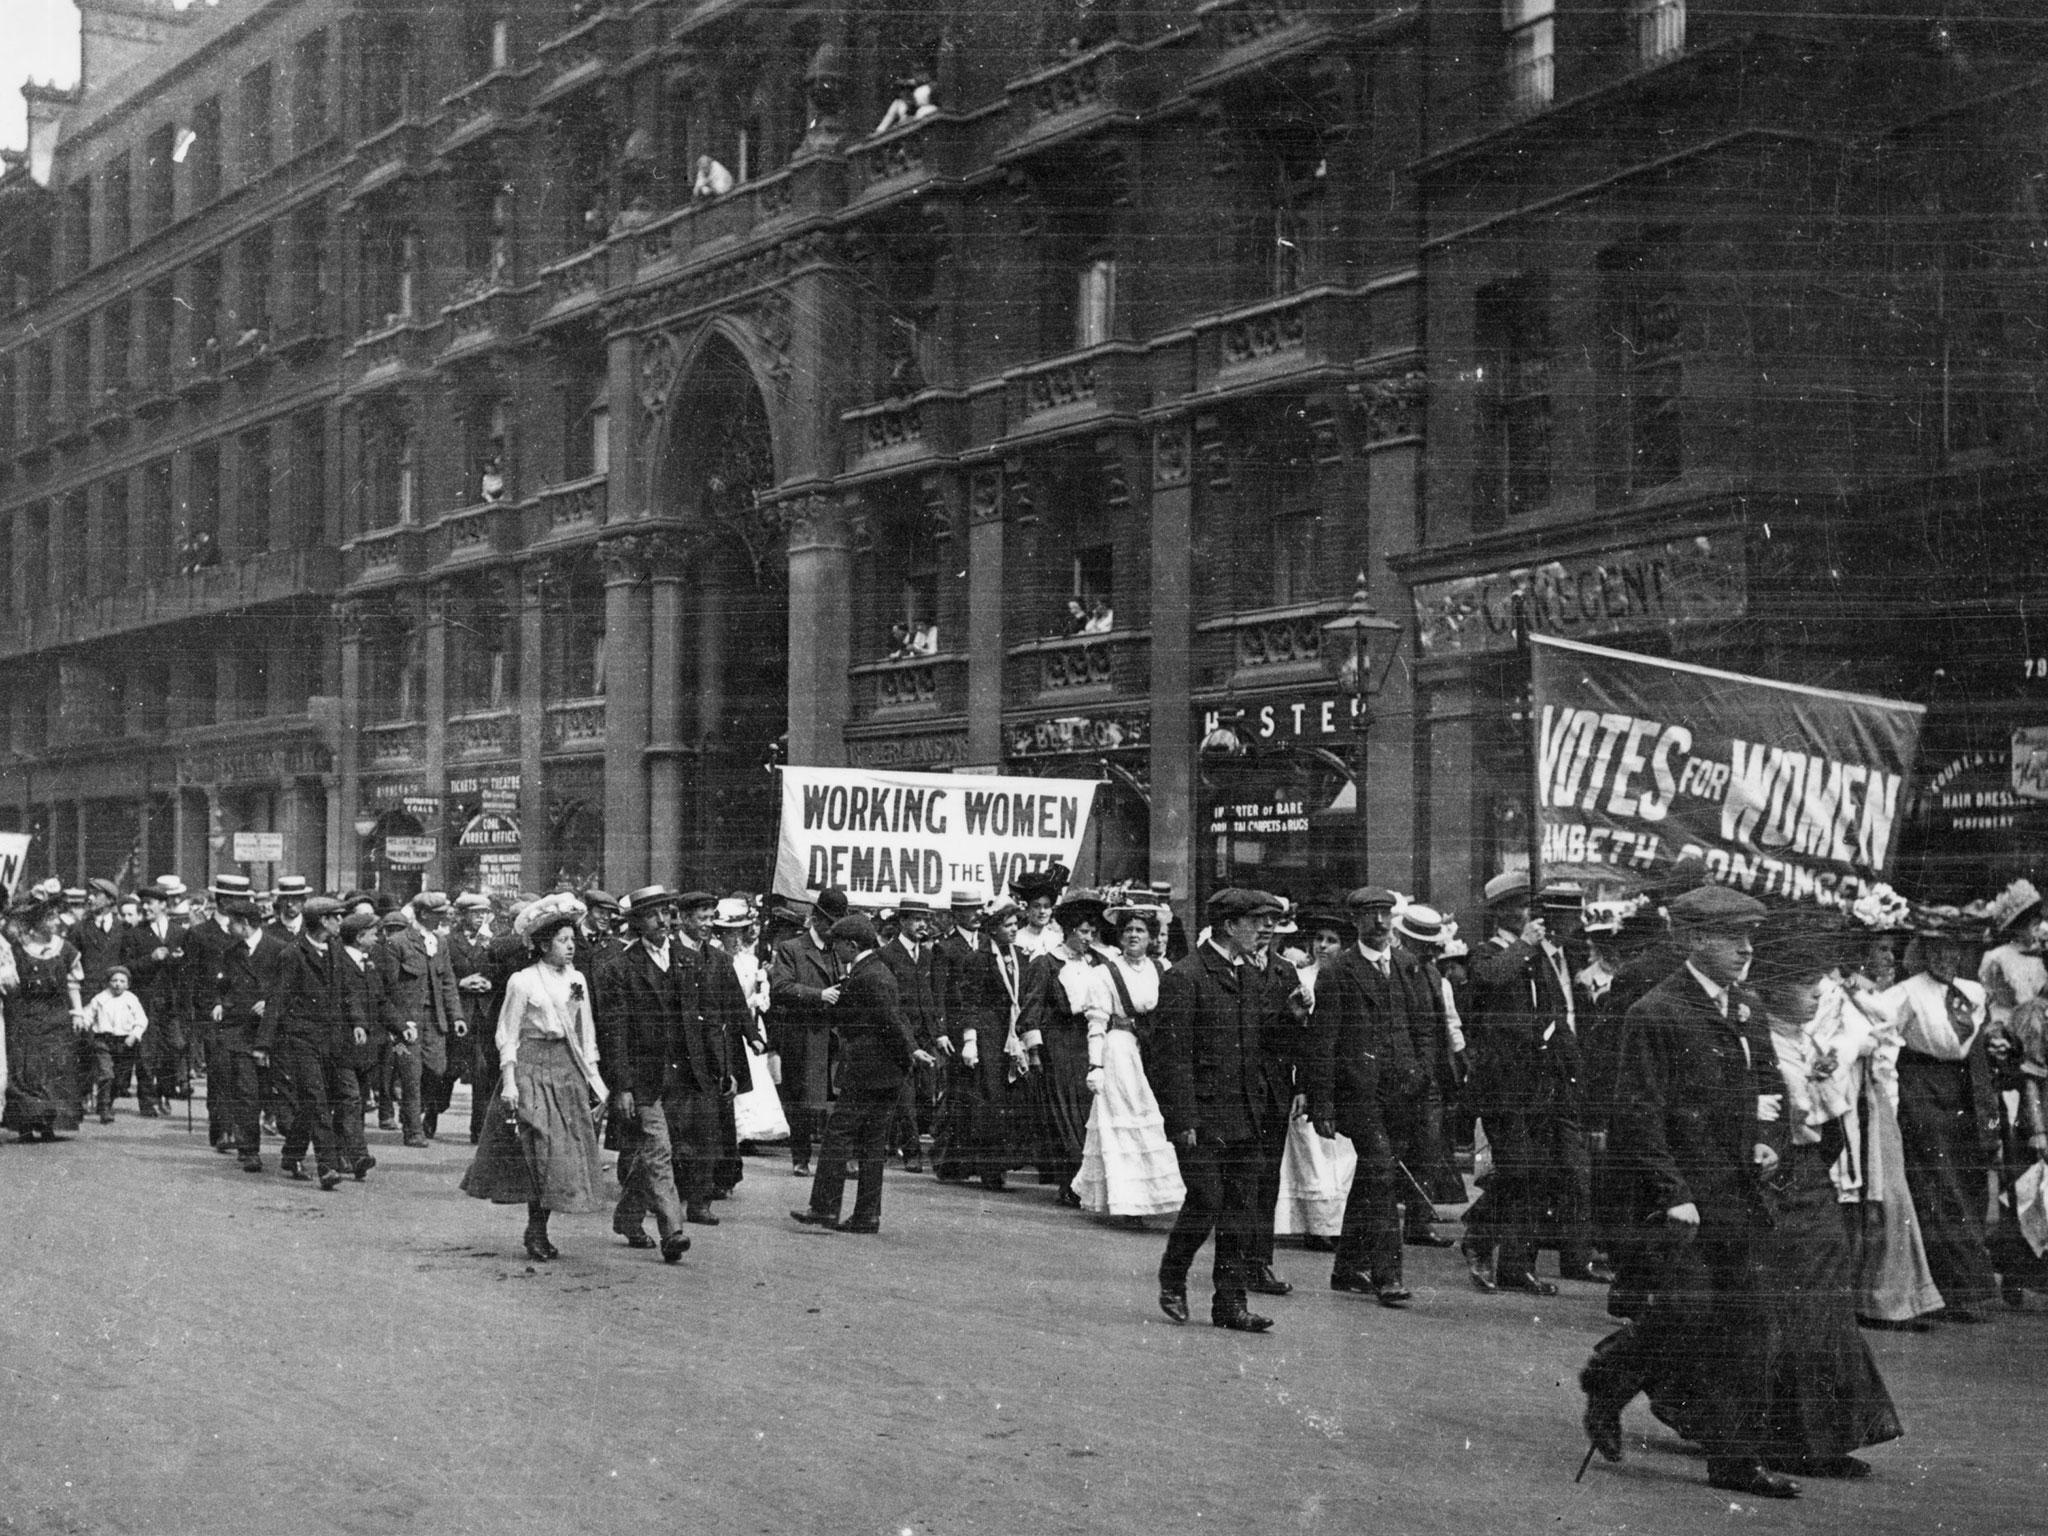 Male and female members of the women's suffrage movement on a protest march through London in 1900